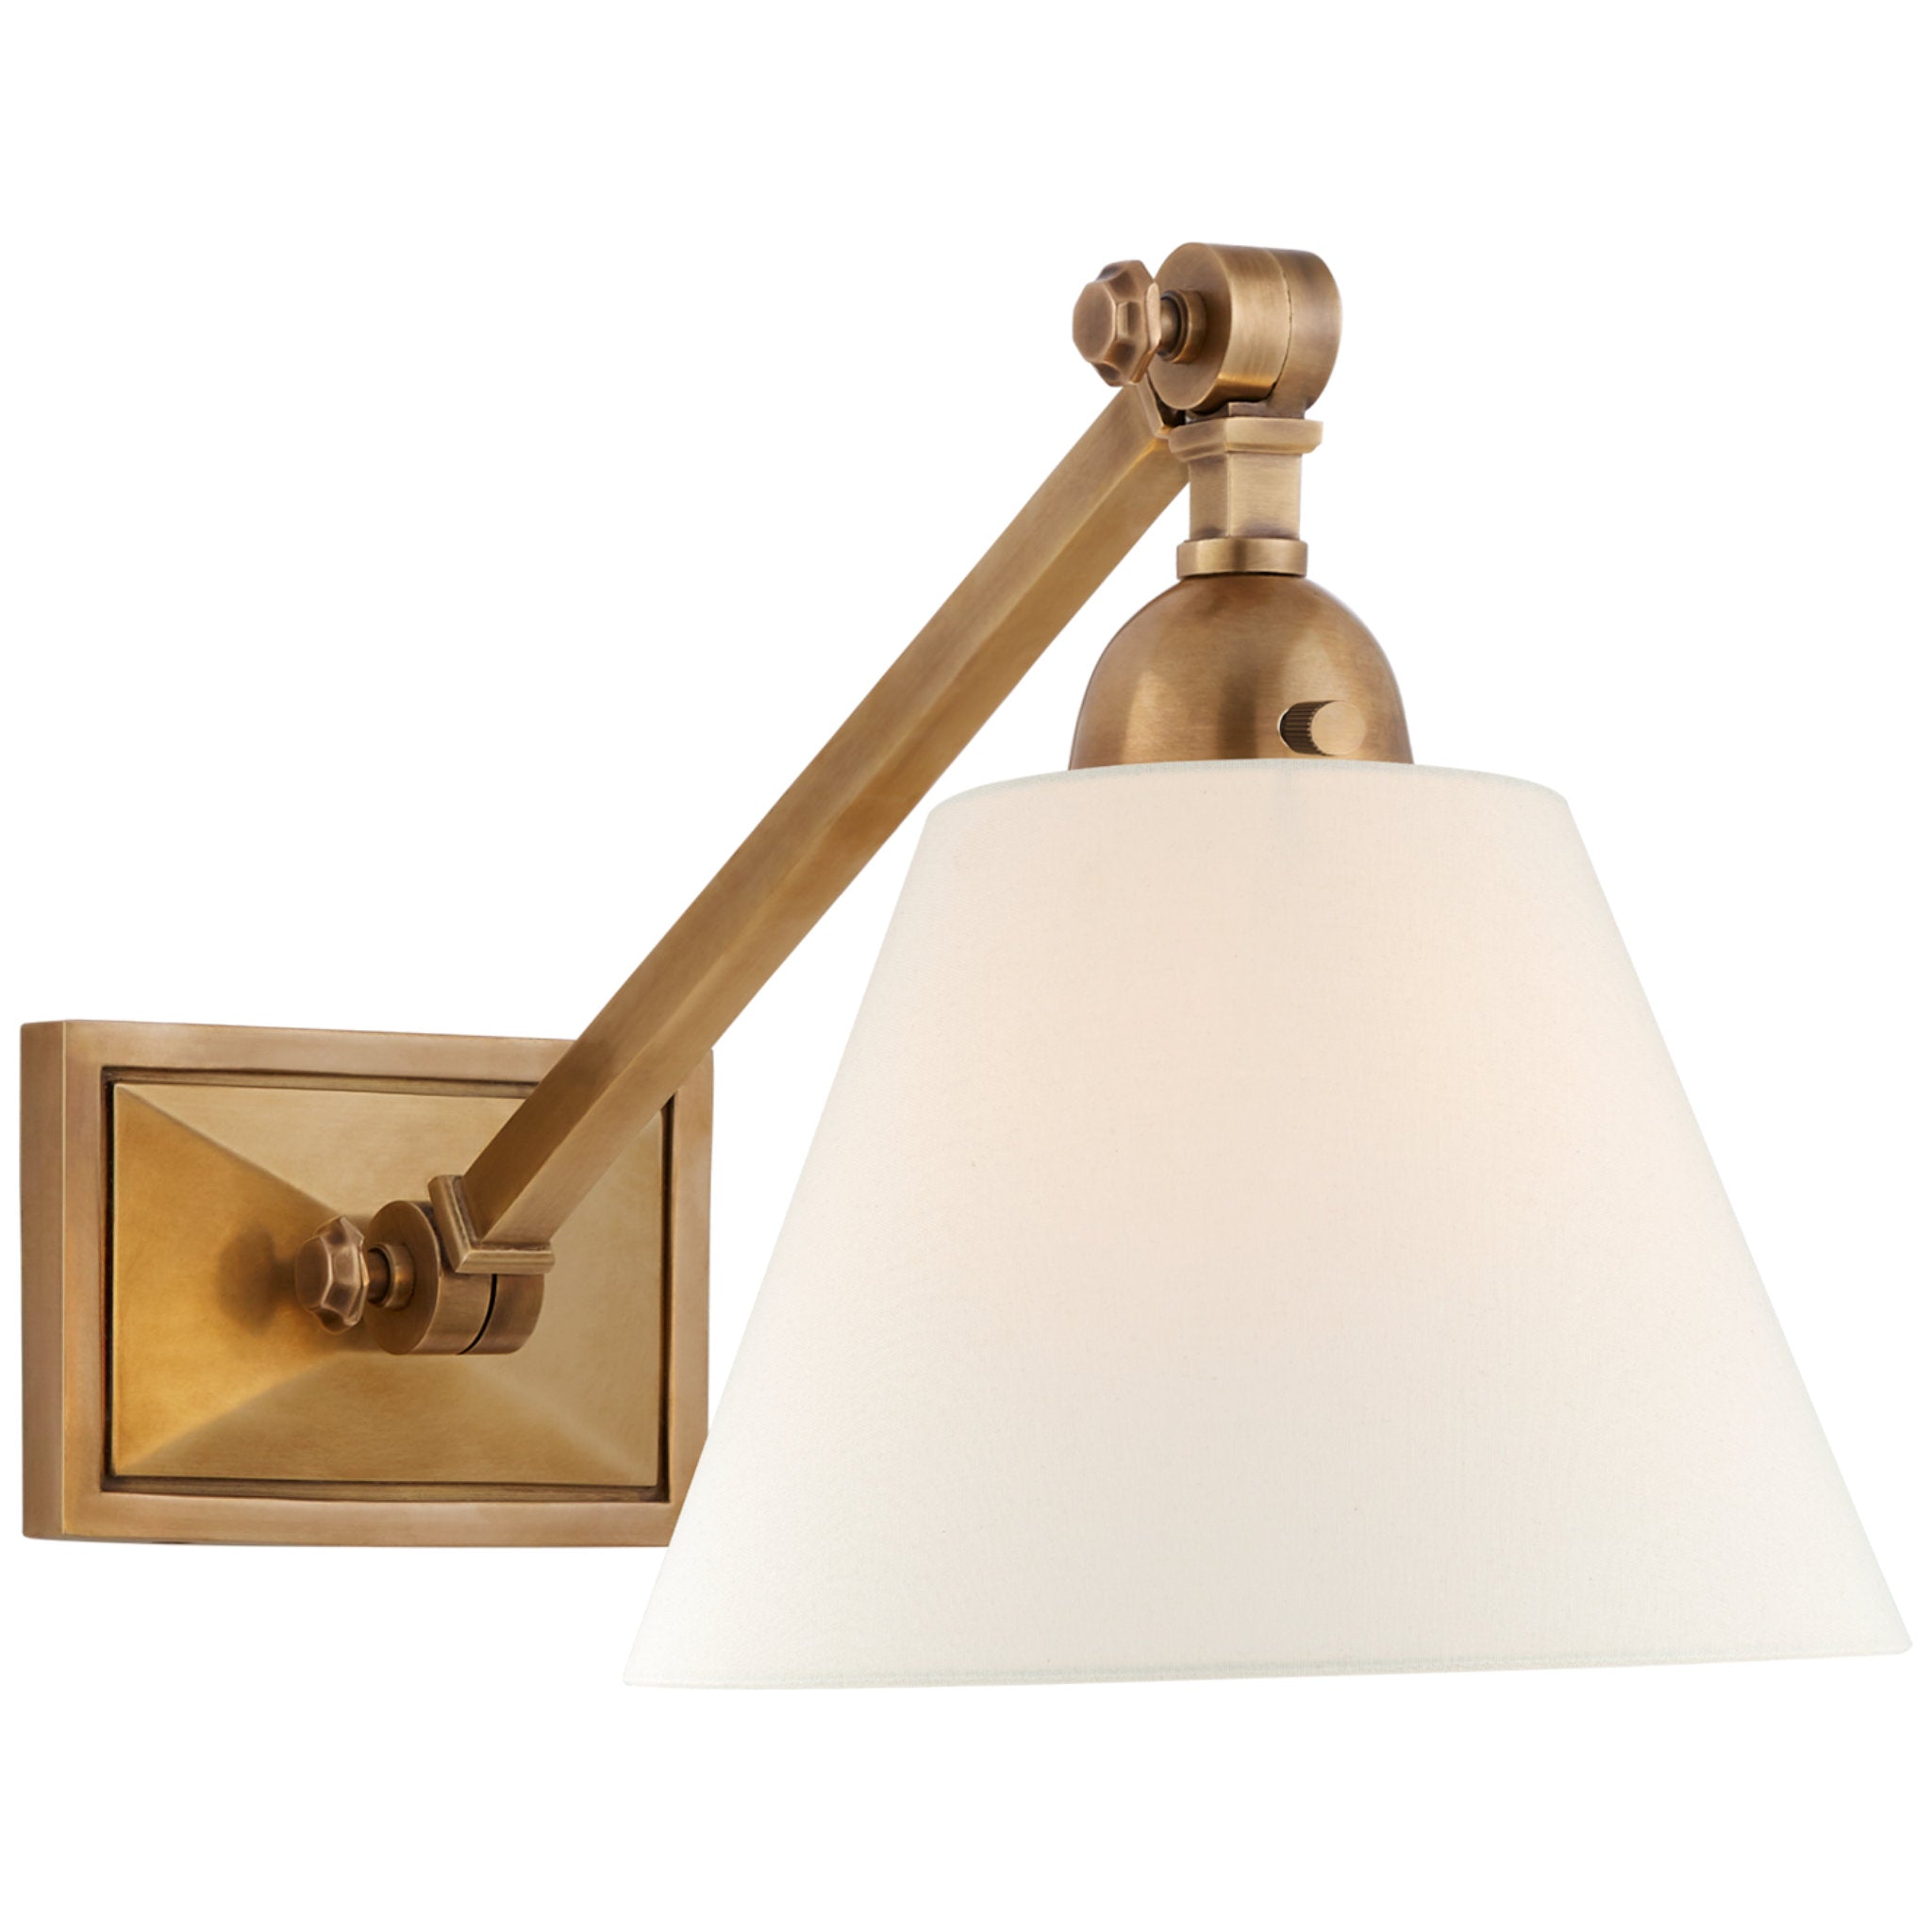 Alexa Hampton Jane Single Library Wall Light in Hand-Rubbed Antique Brass with Linen Shade